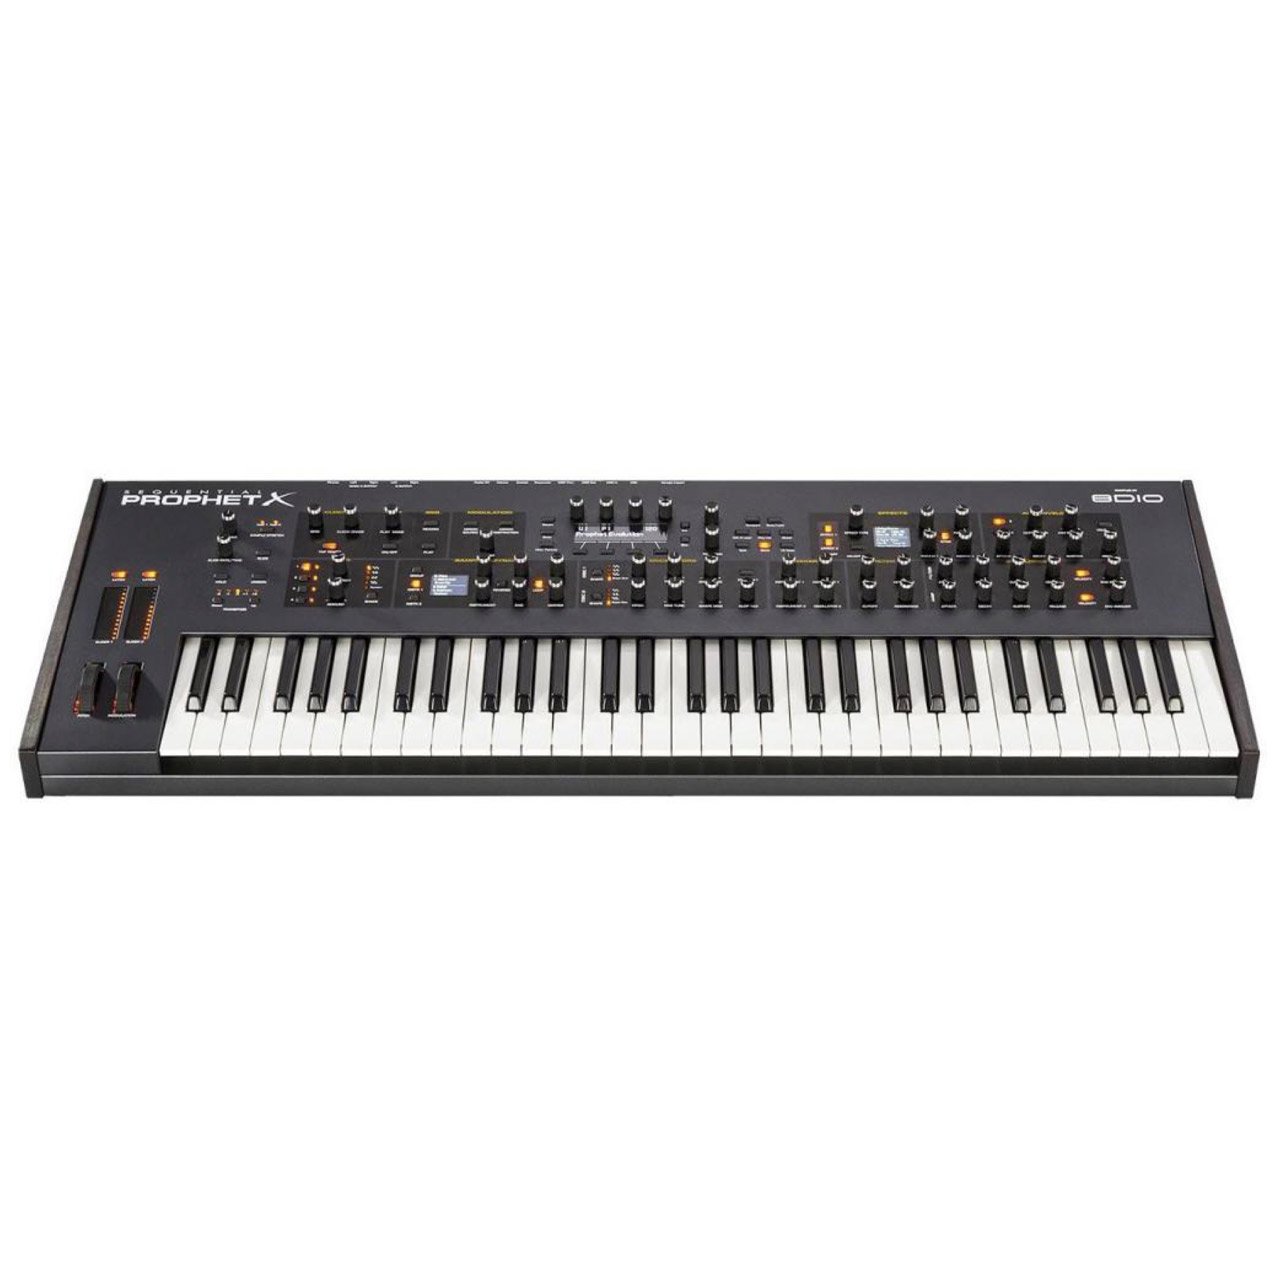 Keyboard Synthesizers - Dave Smith Instruments Sequential Prophet X - Samples-Plus-Synthesis Hybrid Synth